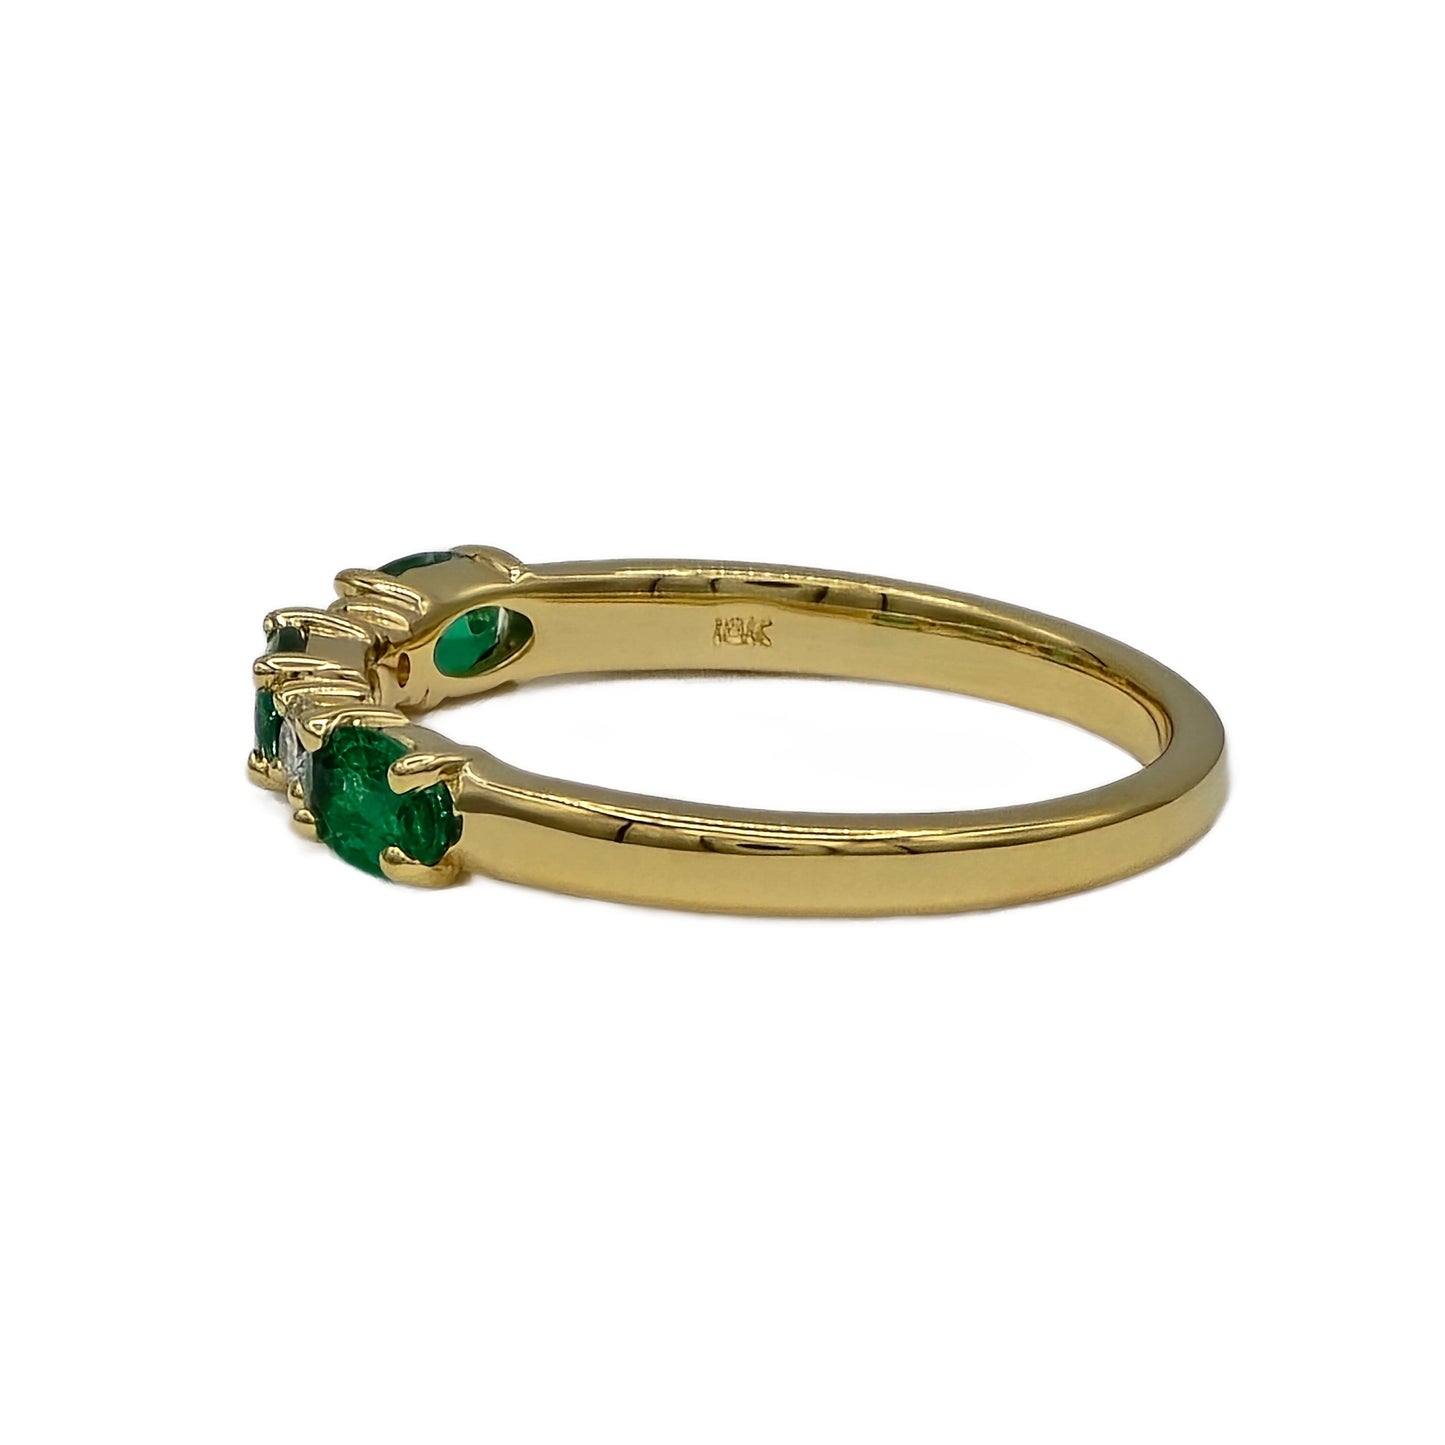 0.63 Carat Oval Emerald and 0.09 Carat Round Diamond Ring in 18K Yellow Gold